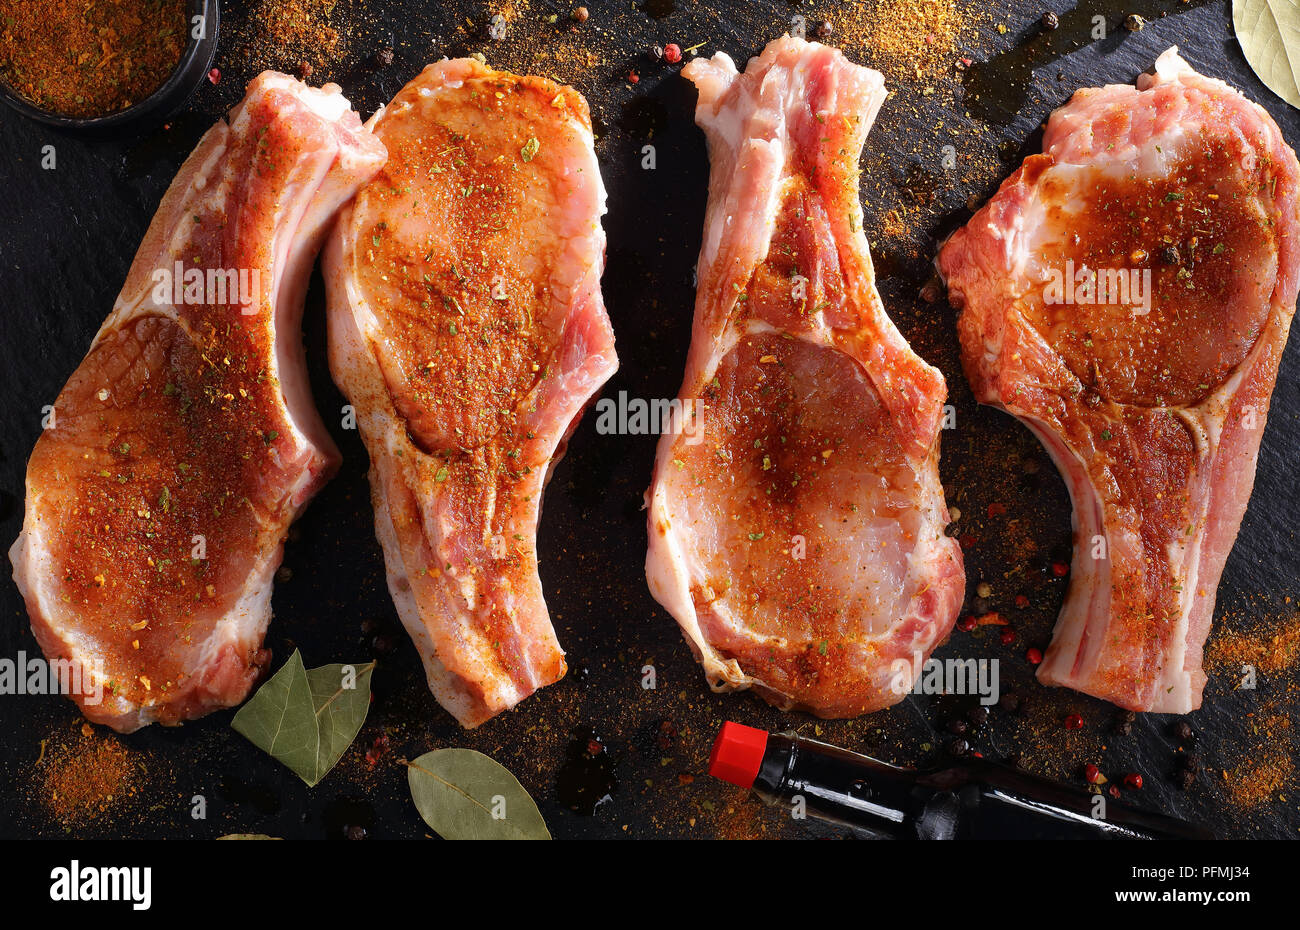 raw pork chops on bone seasoned with spices, peppercorns and bay leaf on a black slate tray on wooden table with bottle of worcester sauce and knife,  Stock Photo